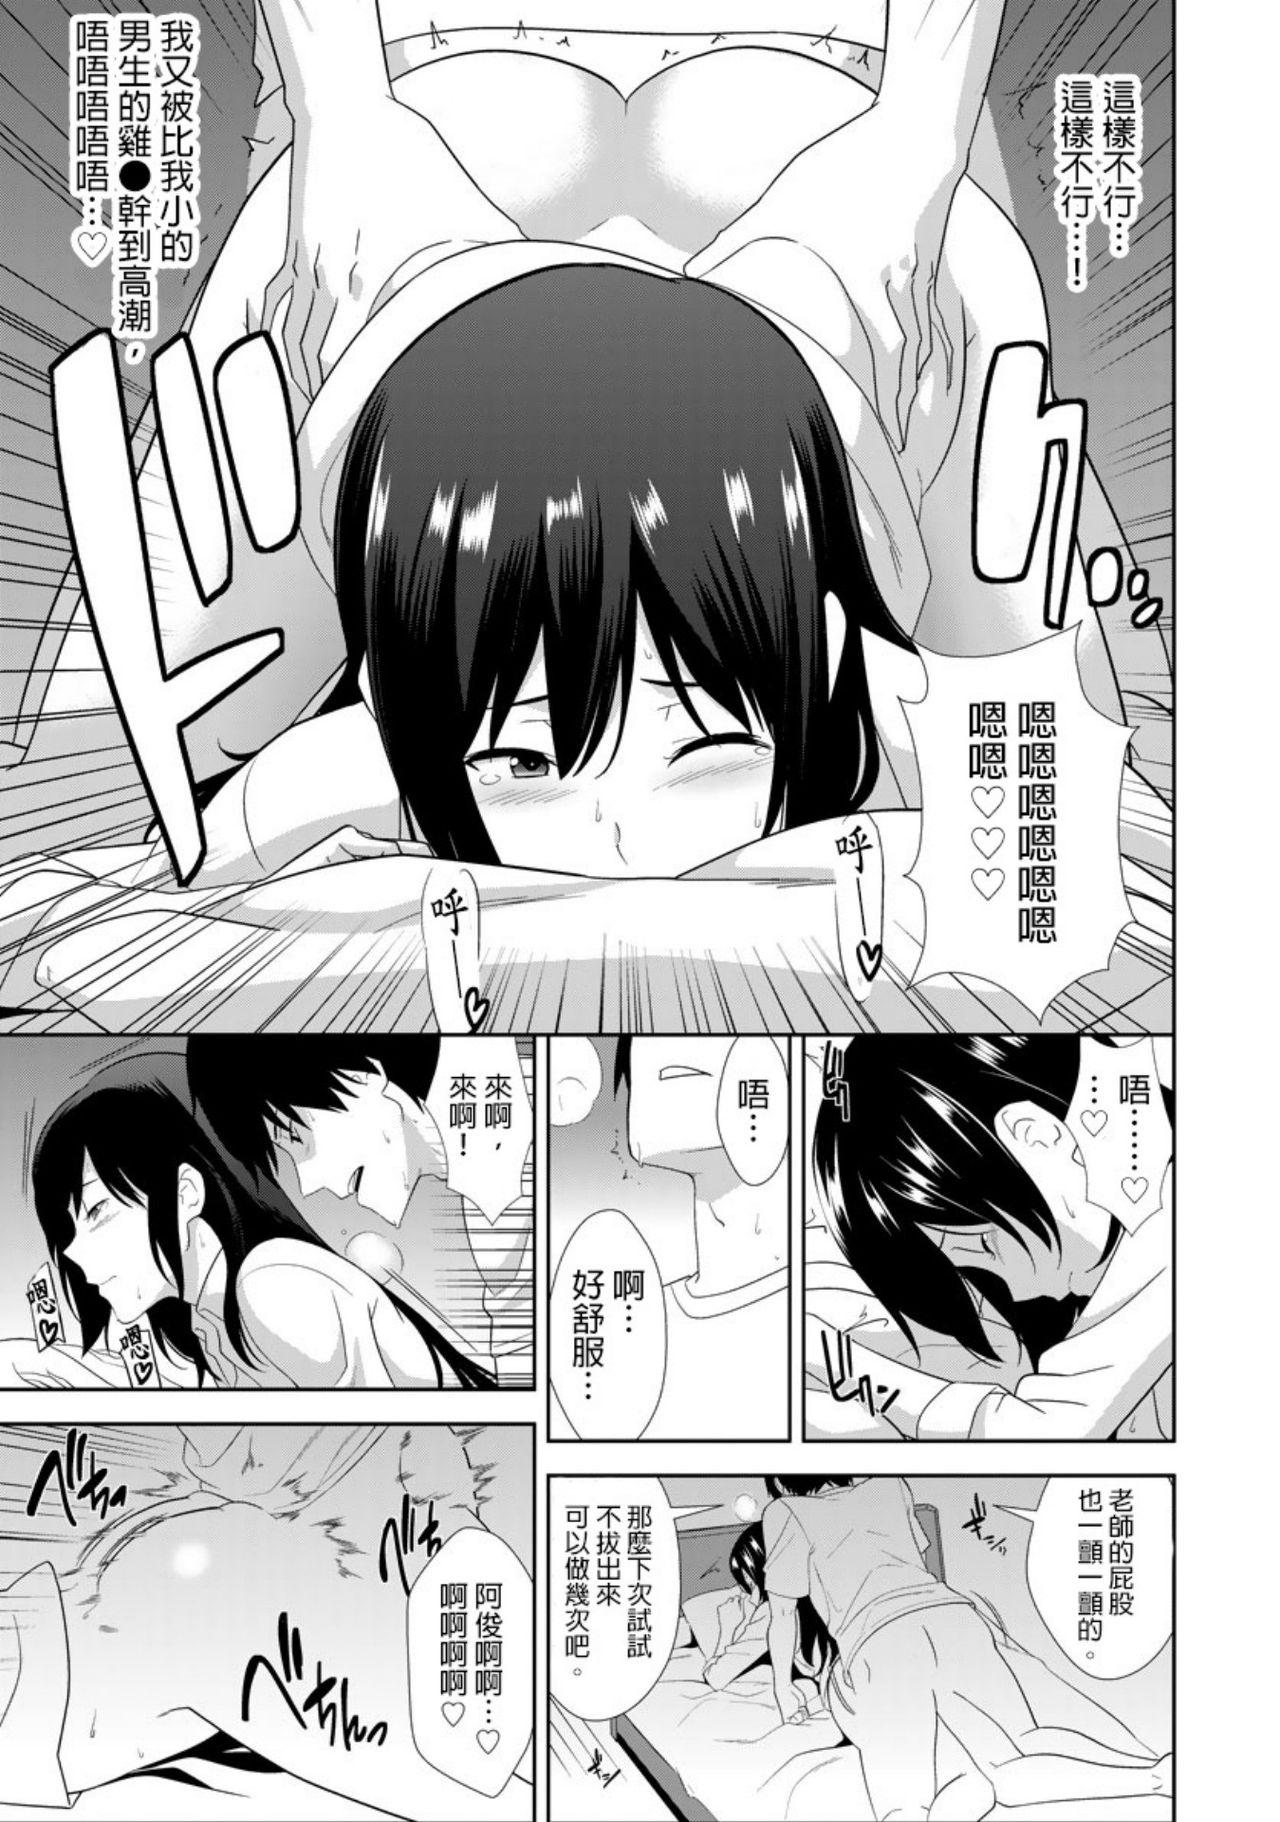 Lez Fuck 教え子に襲ワレル人妻は抵抗できなくて Ch.7 8teen - Page 12